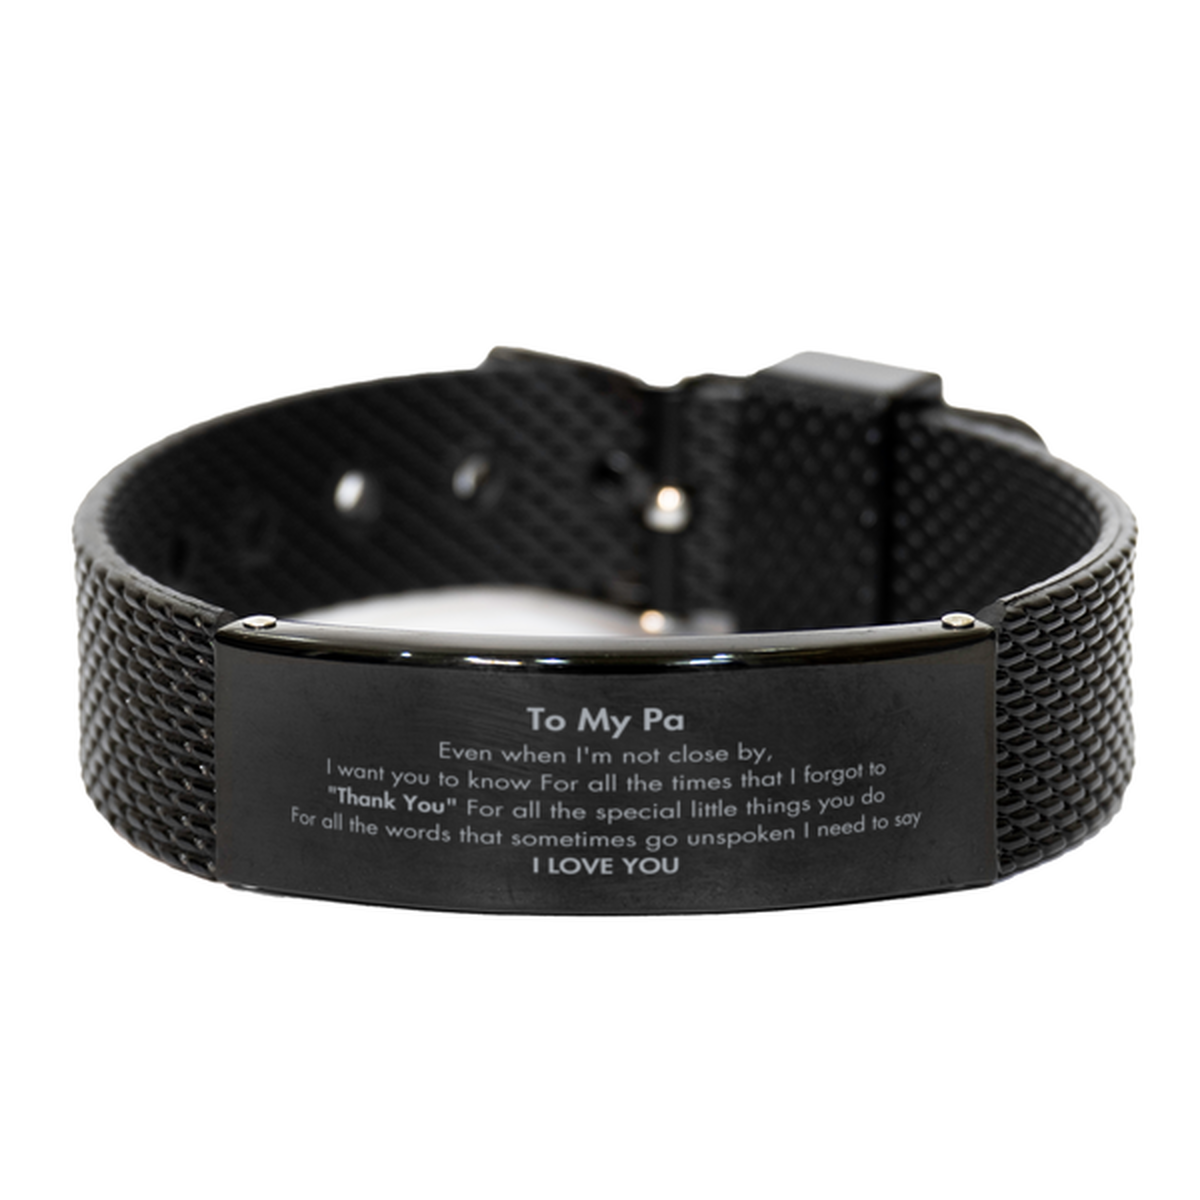 Thank You Gifts for Pa, Keepsake Black Shark Mesh Bracelet Gifts for Pa Birthday Mother's day Father's Day Pa For all the words That sometimes go unspoken I need to say I LOVE YOU